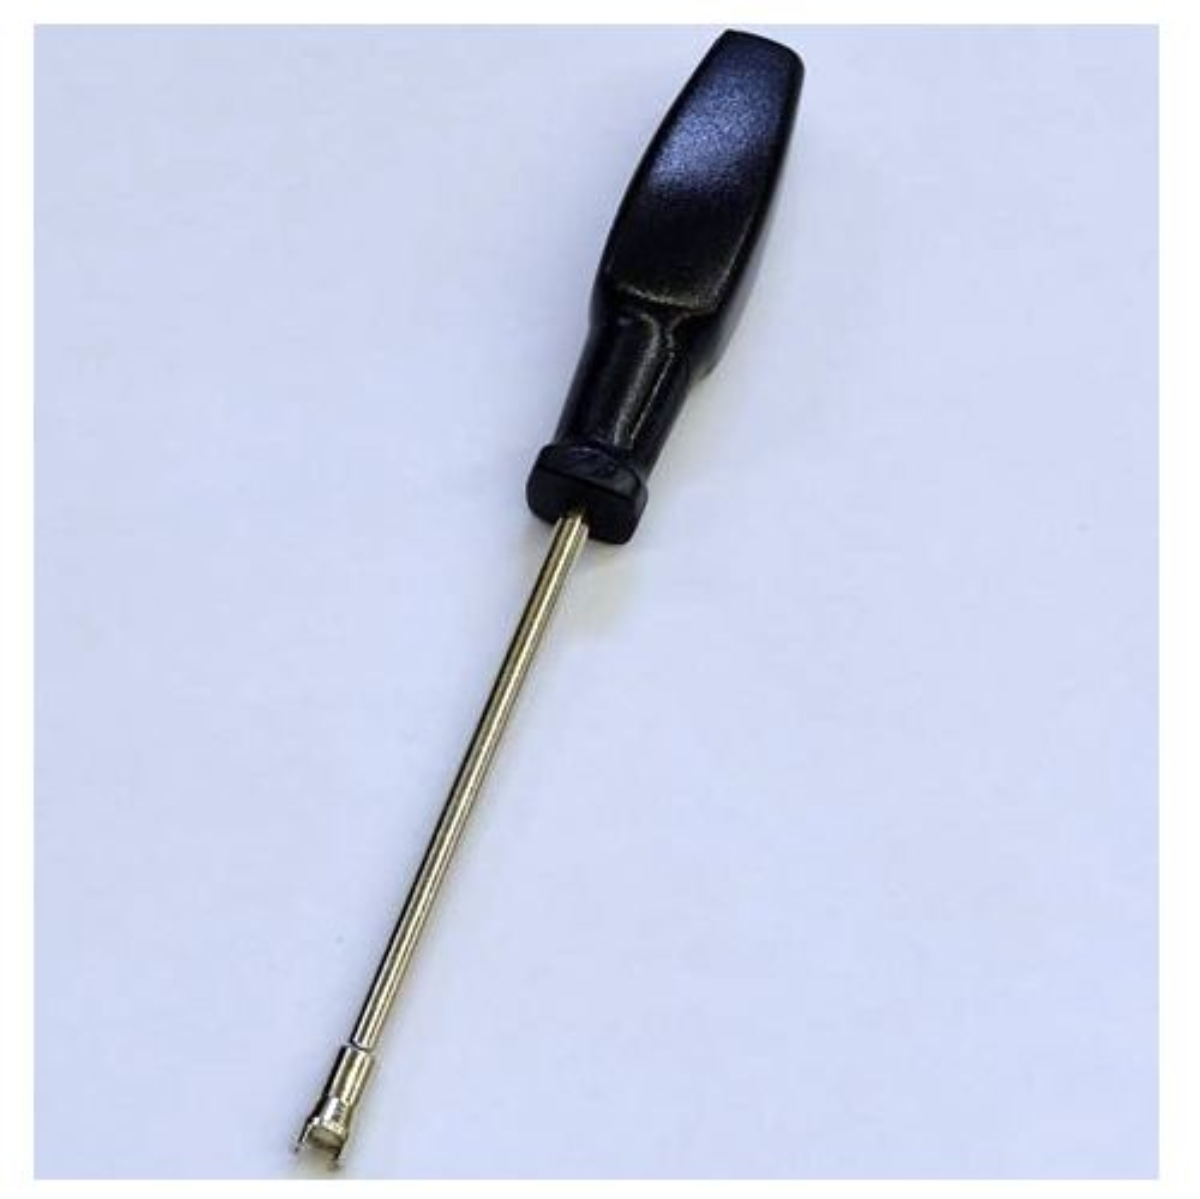 Coughtrie 2 Prong Stair Lighting Screwdriver